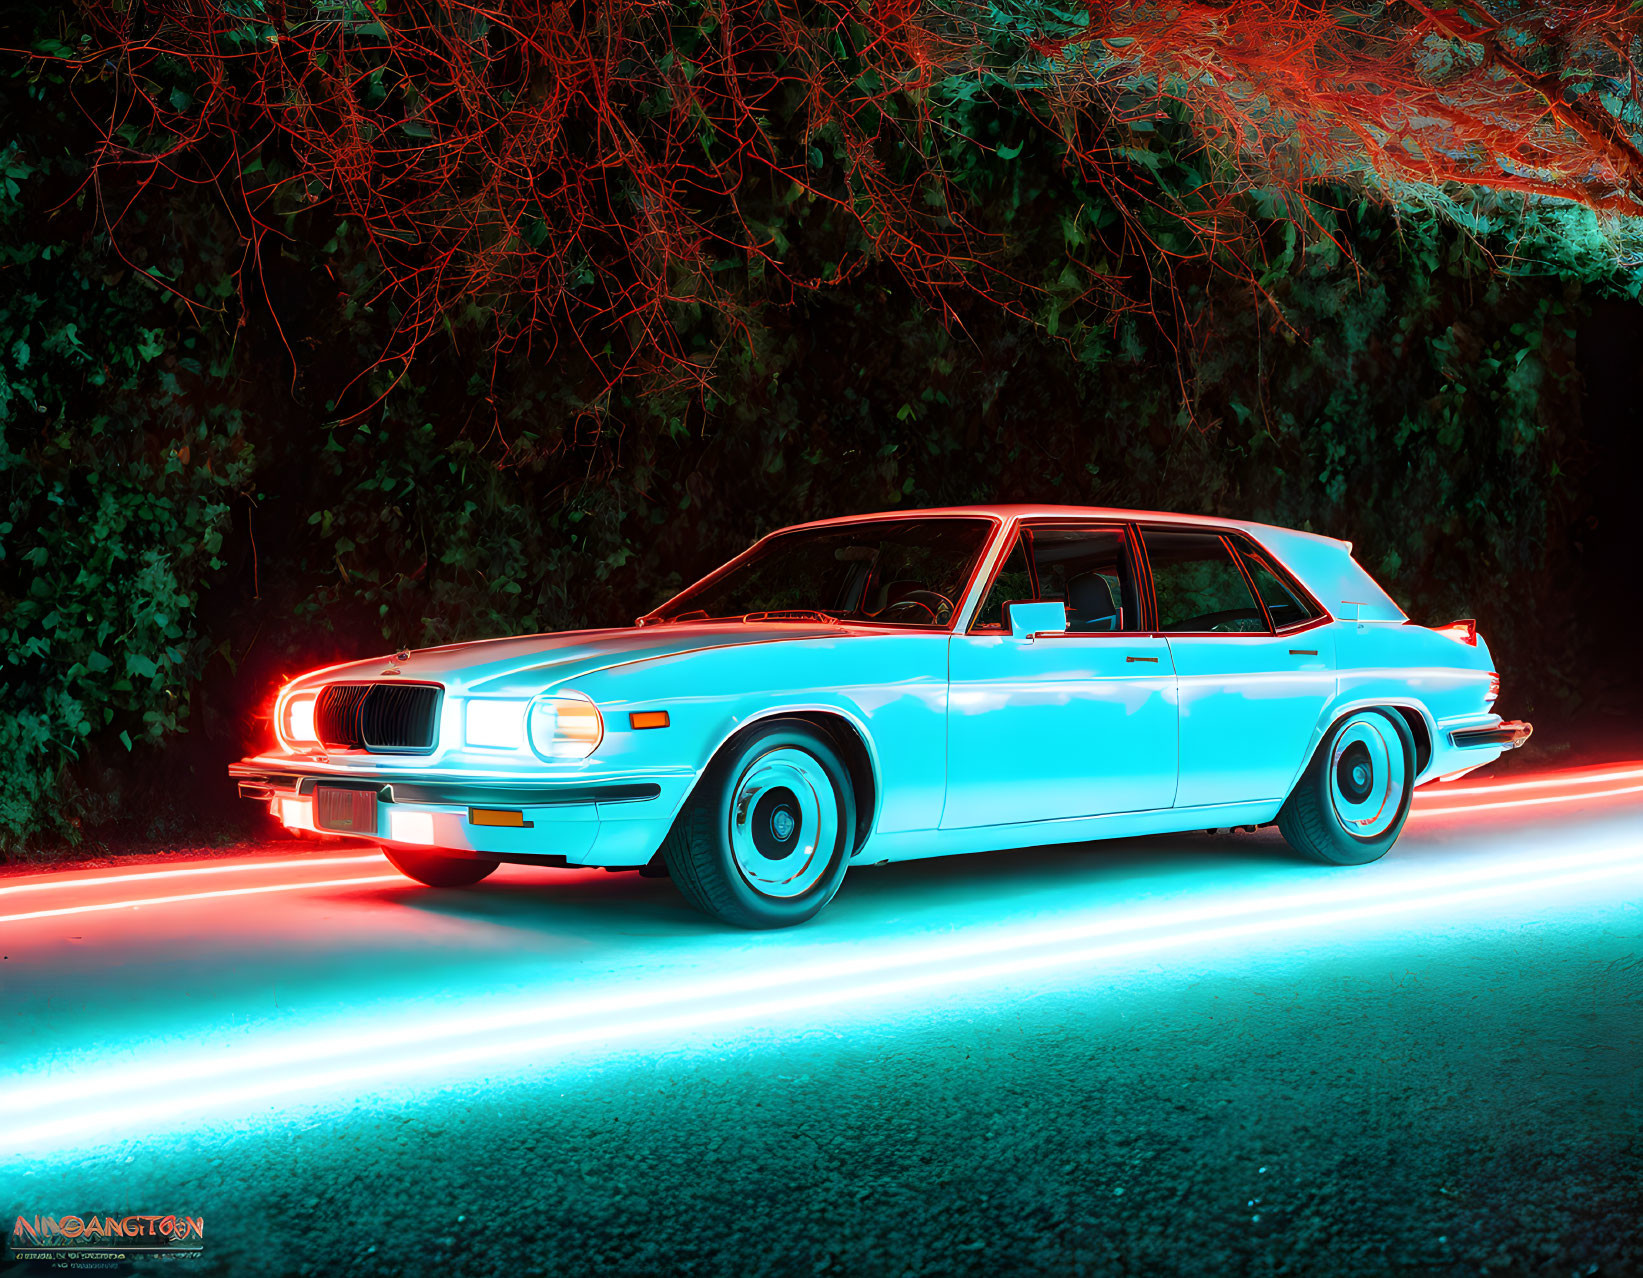 Vintage Car with Glowing Blue Underlights in Red-Lit Nighttime Scene